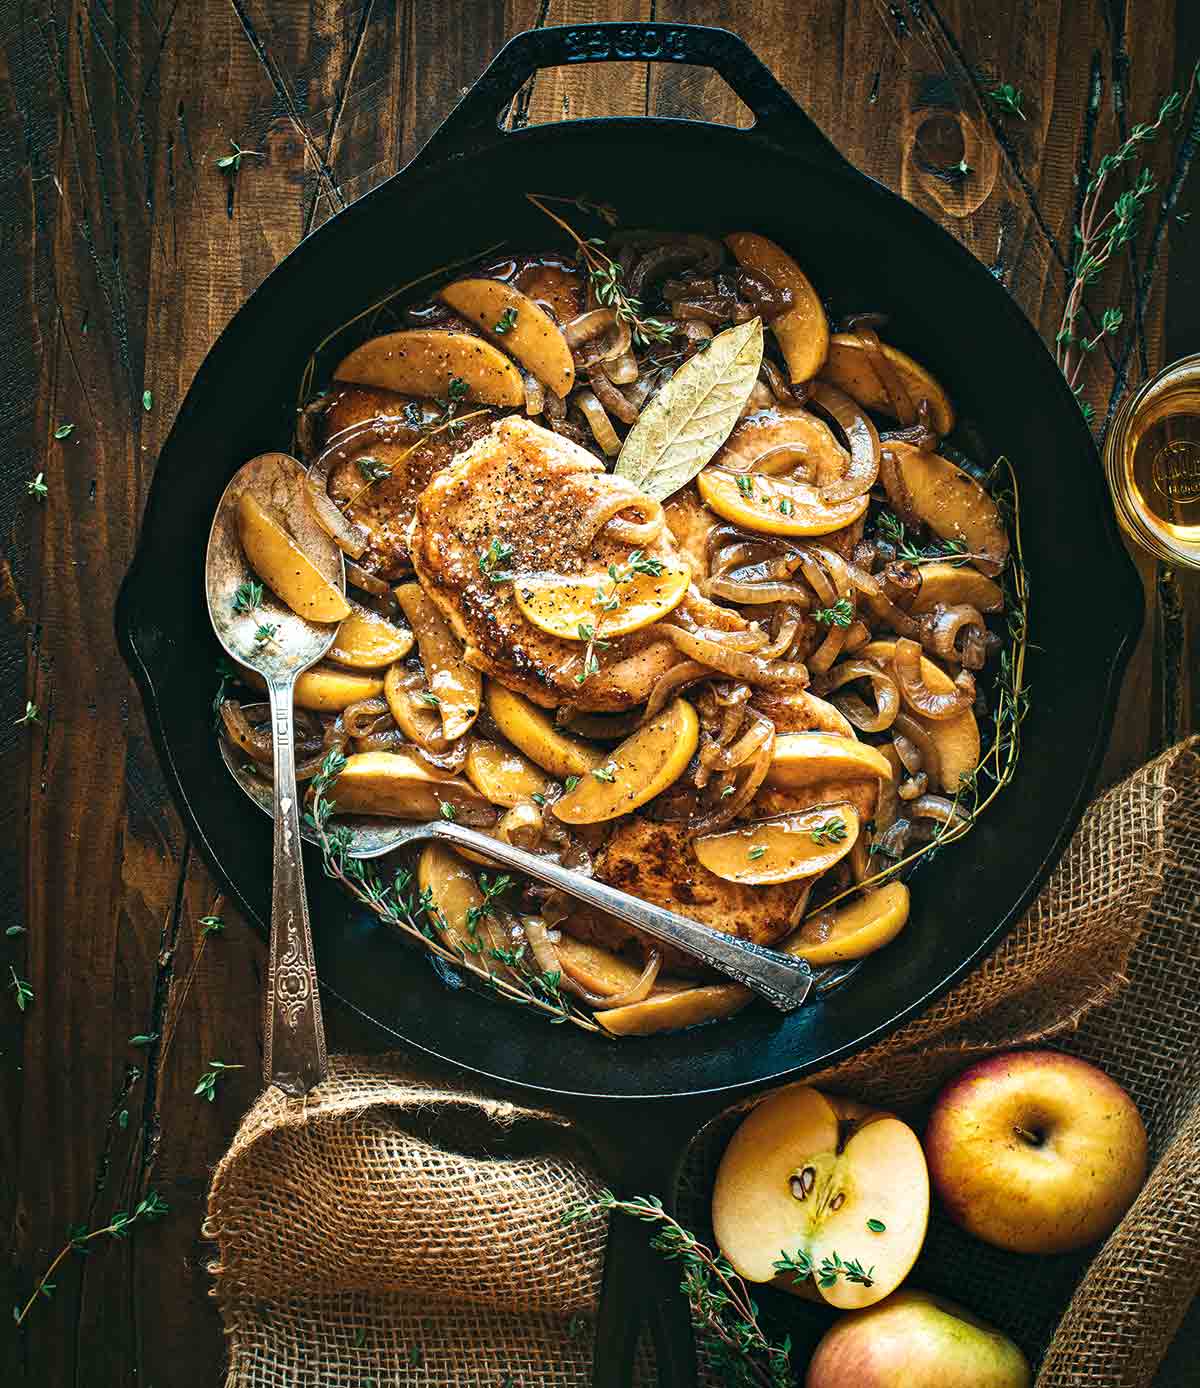 Paleo pork Normandy garnished with thyme, in a cast-iron pan with two serving forks, surrounded by burlap, apples, and thyme.